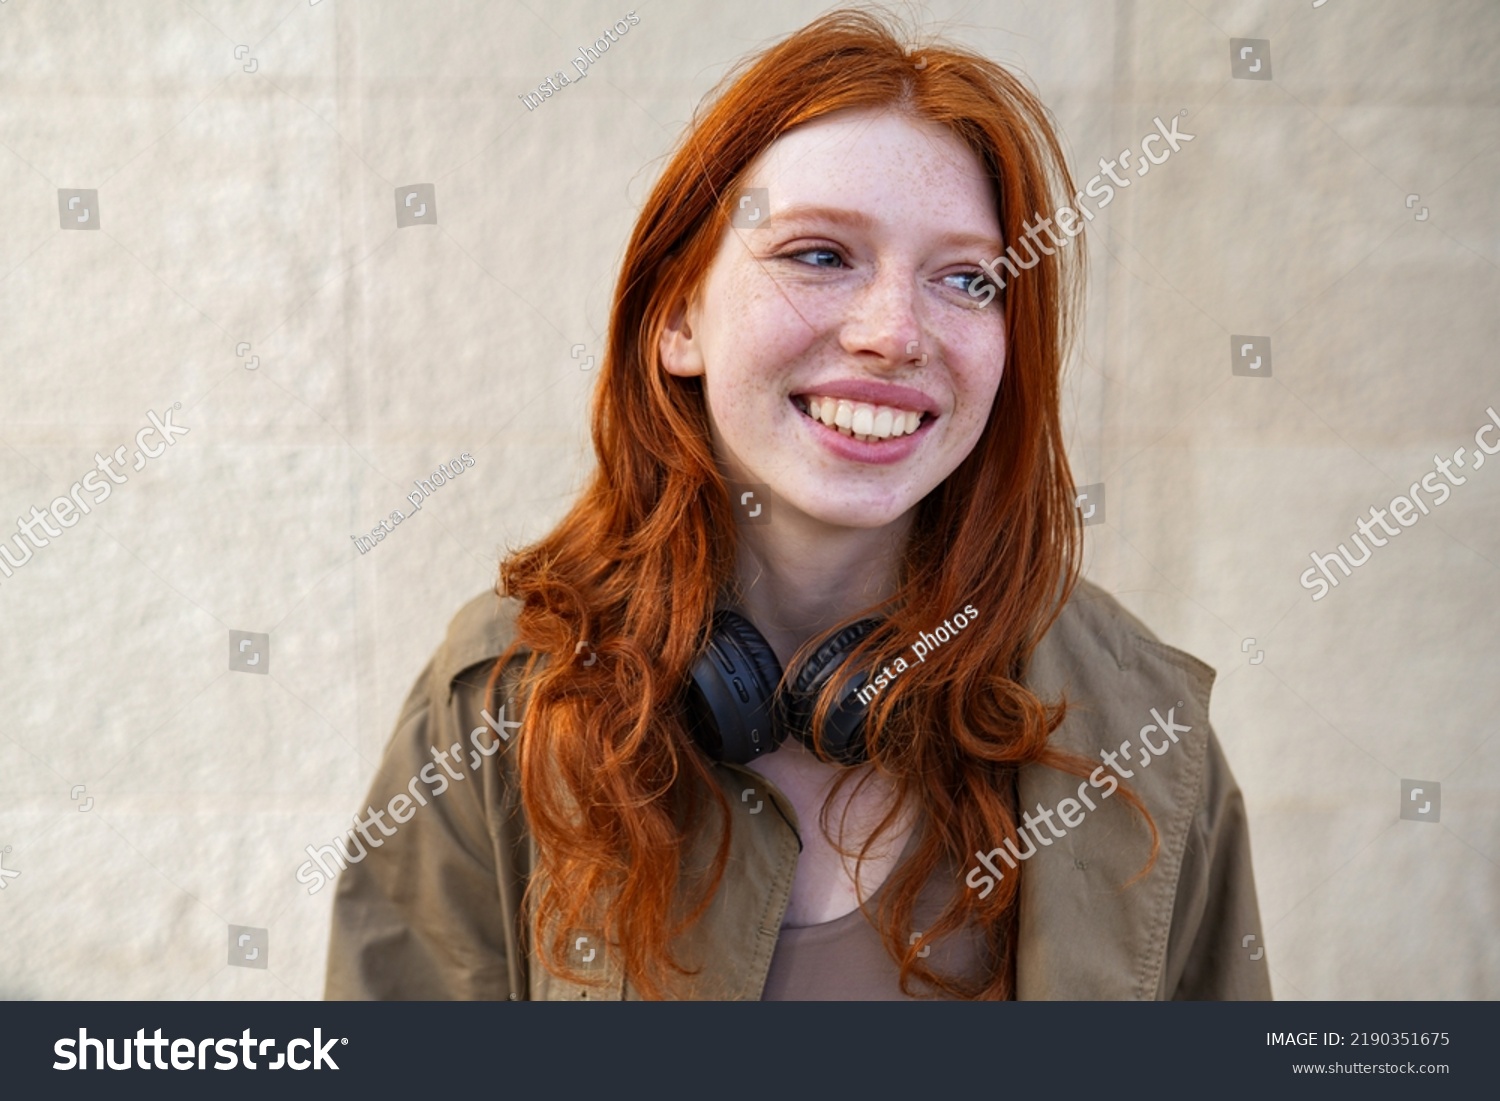 Happy teen stylish cool redhead fashion girl model standing on urban wall background laughing. Close up portrait of pretty joyful smiling teenage hipster girl with red hair looking away outdoors. #2190351675